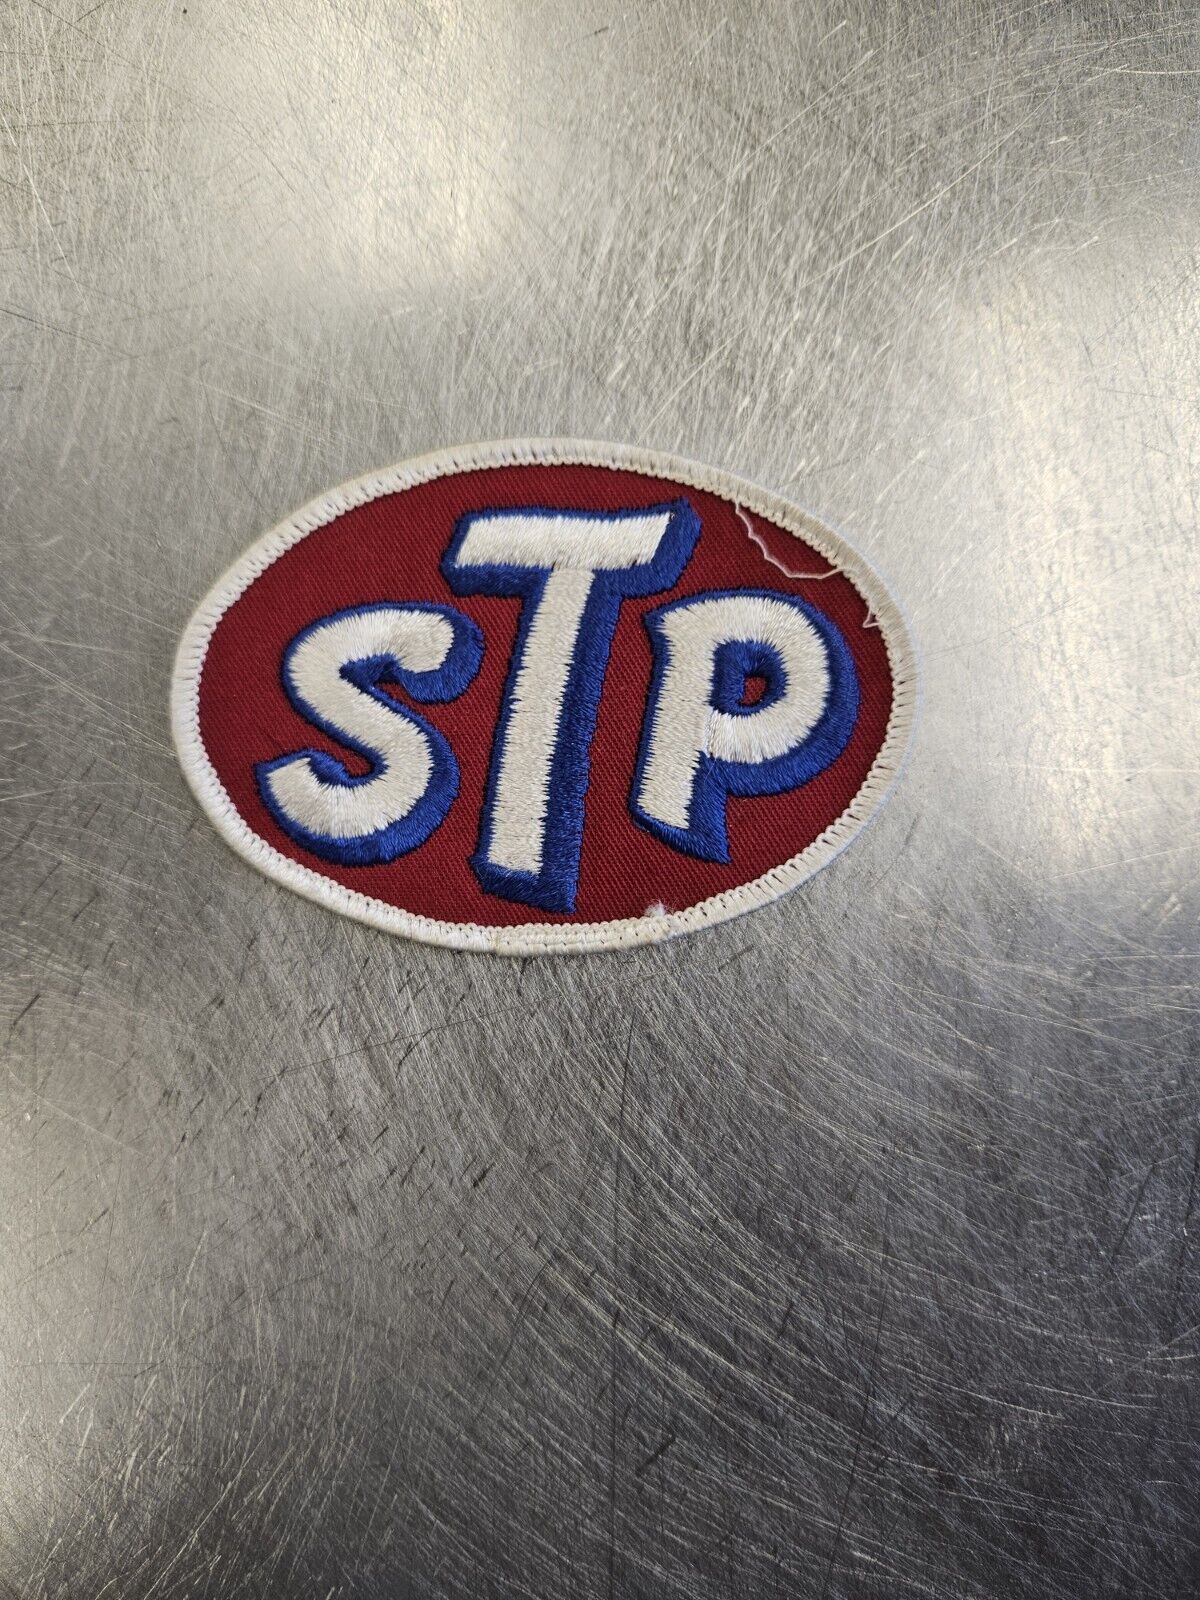 Vintage Sew-On STP Racing Patch  1970s